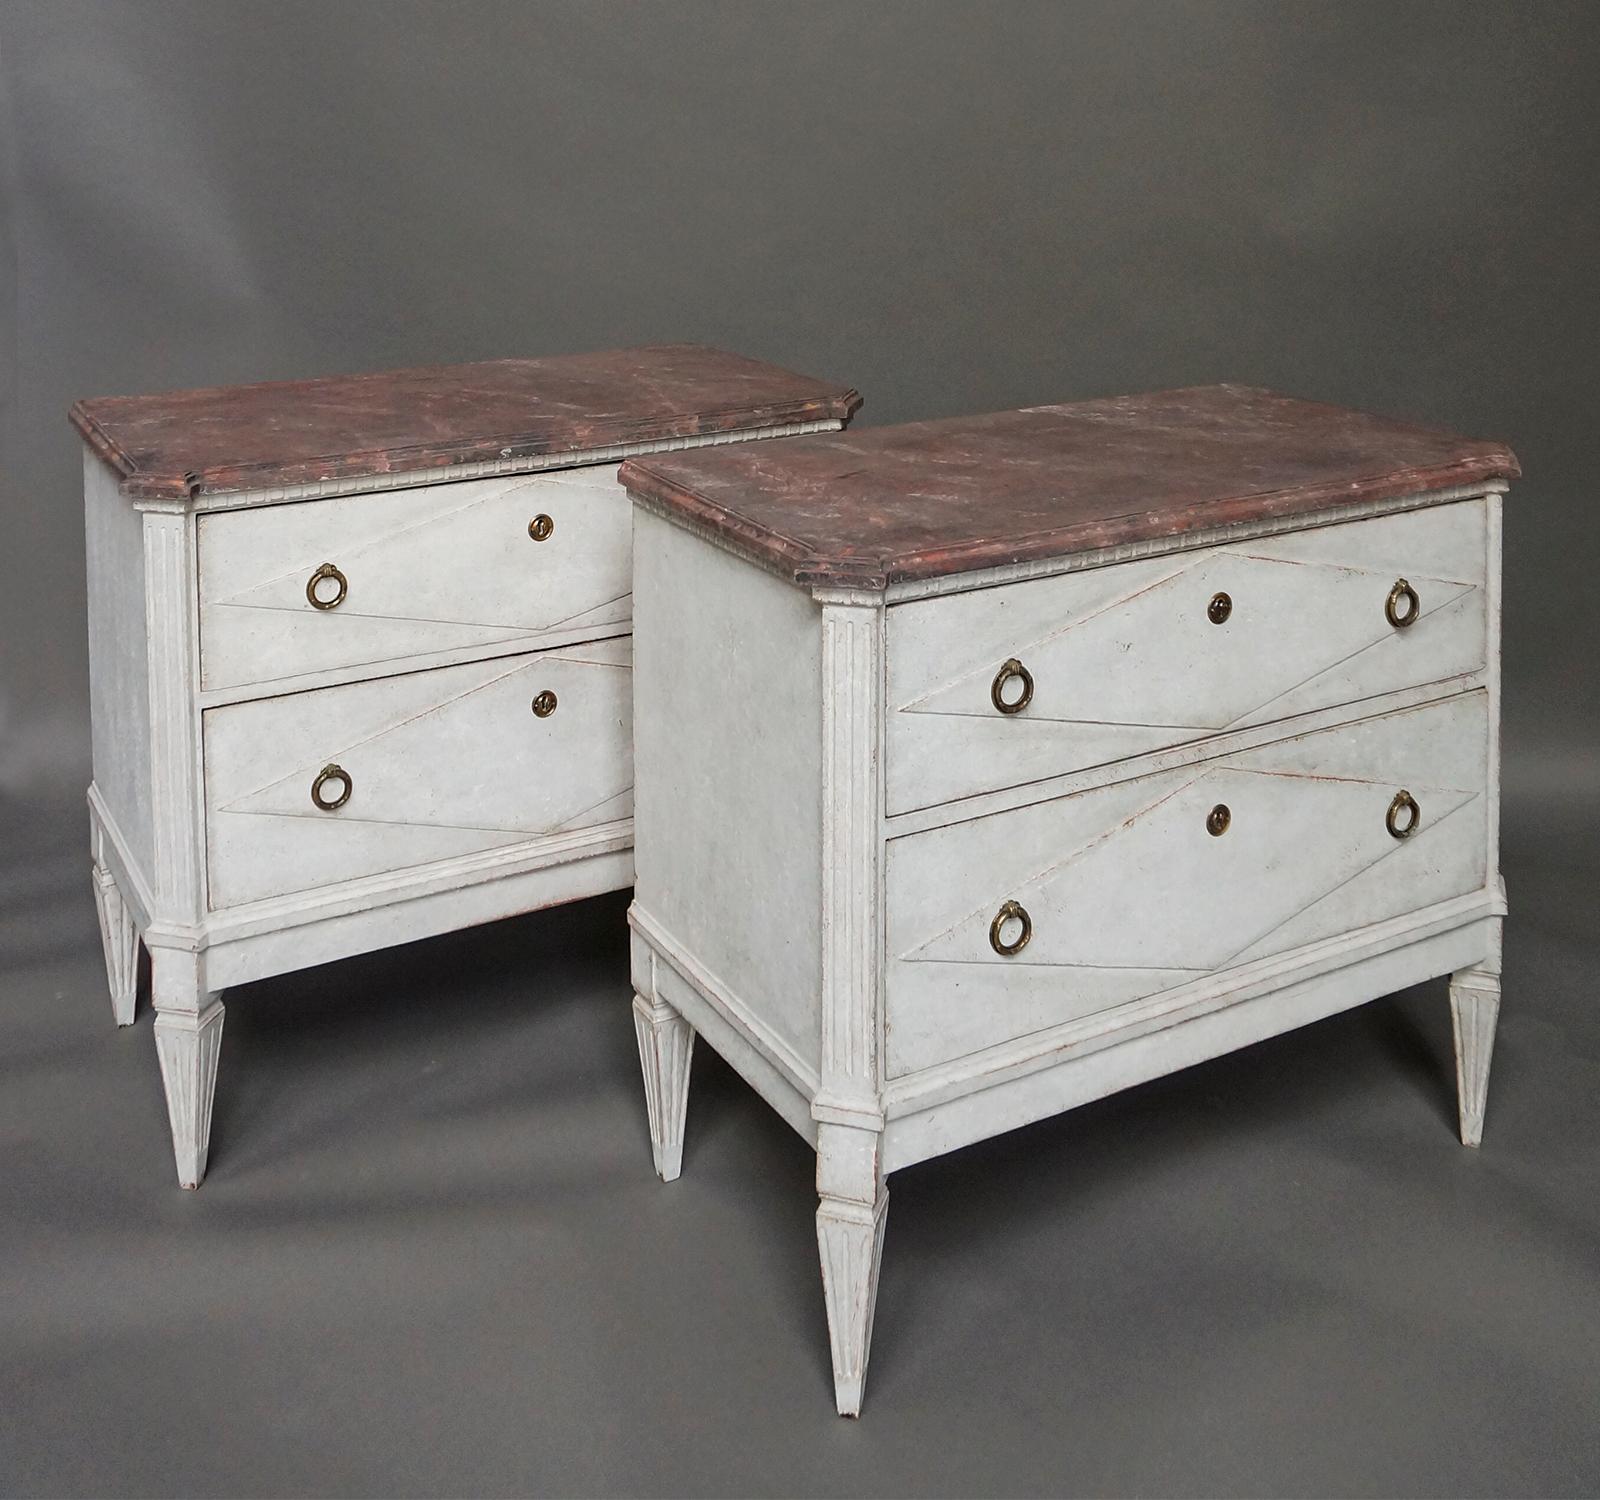 Pair of two drawer chests, Sweden circa 1870, in the Gustavian style. Shaped tops painted as red marble have dentil molding below. Each drawer front has a raised lozenge and brass pulls. Fluted corner posts extend to tapering square feet.